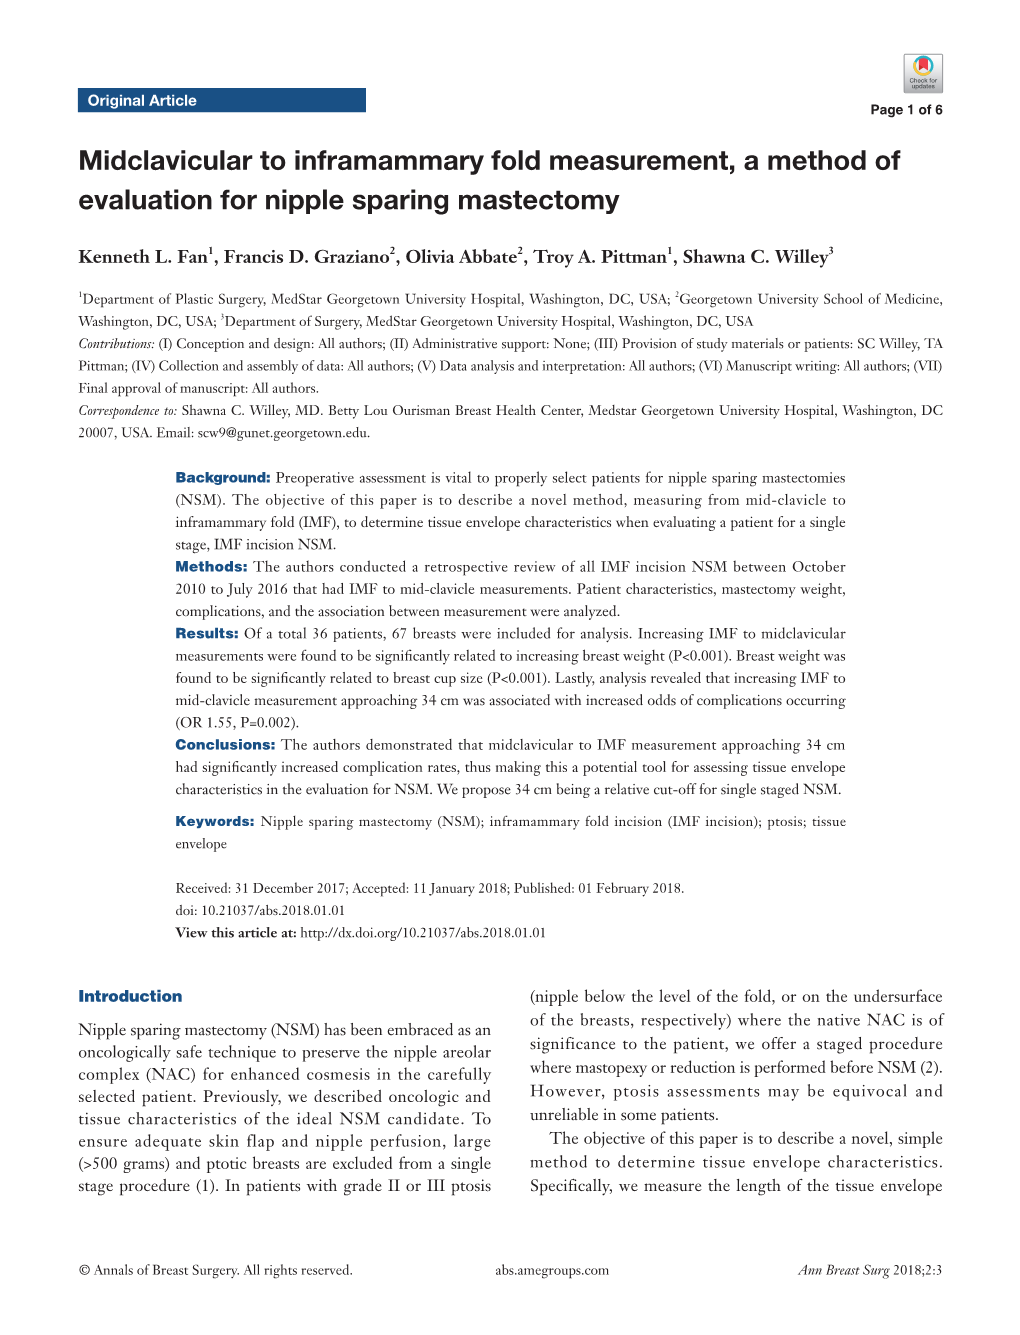 Midclavicular to Inframammary Fold Measurement, a Method of Evaluation for Nipple Sparing Mastectomy